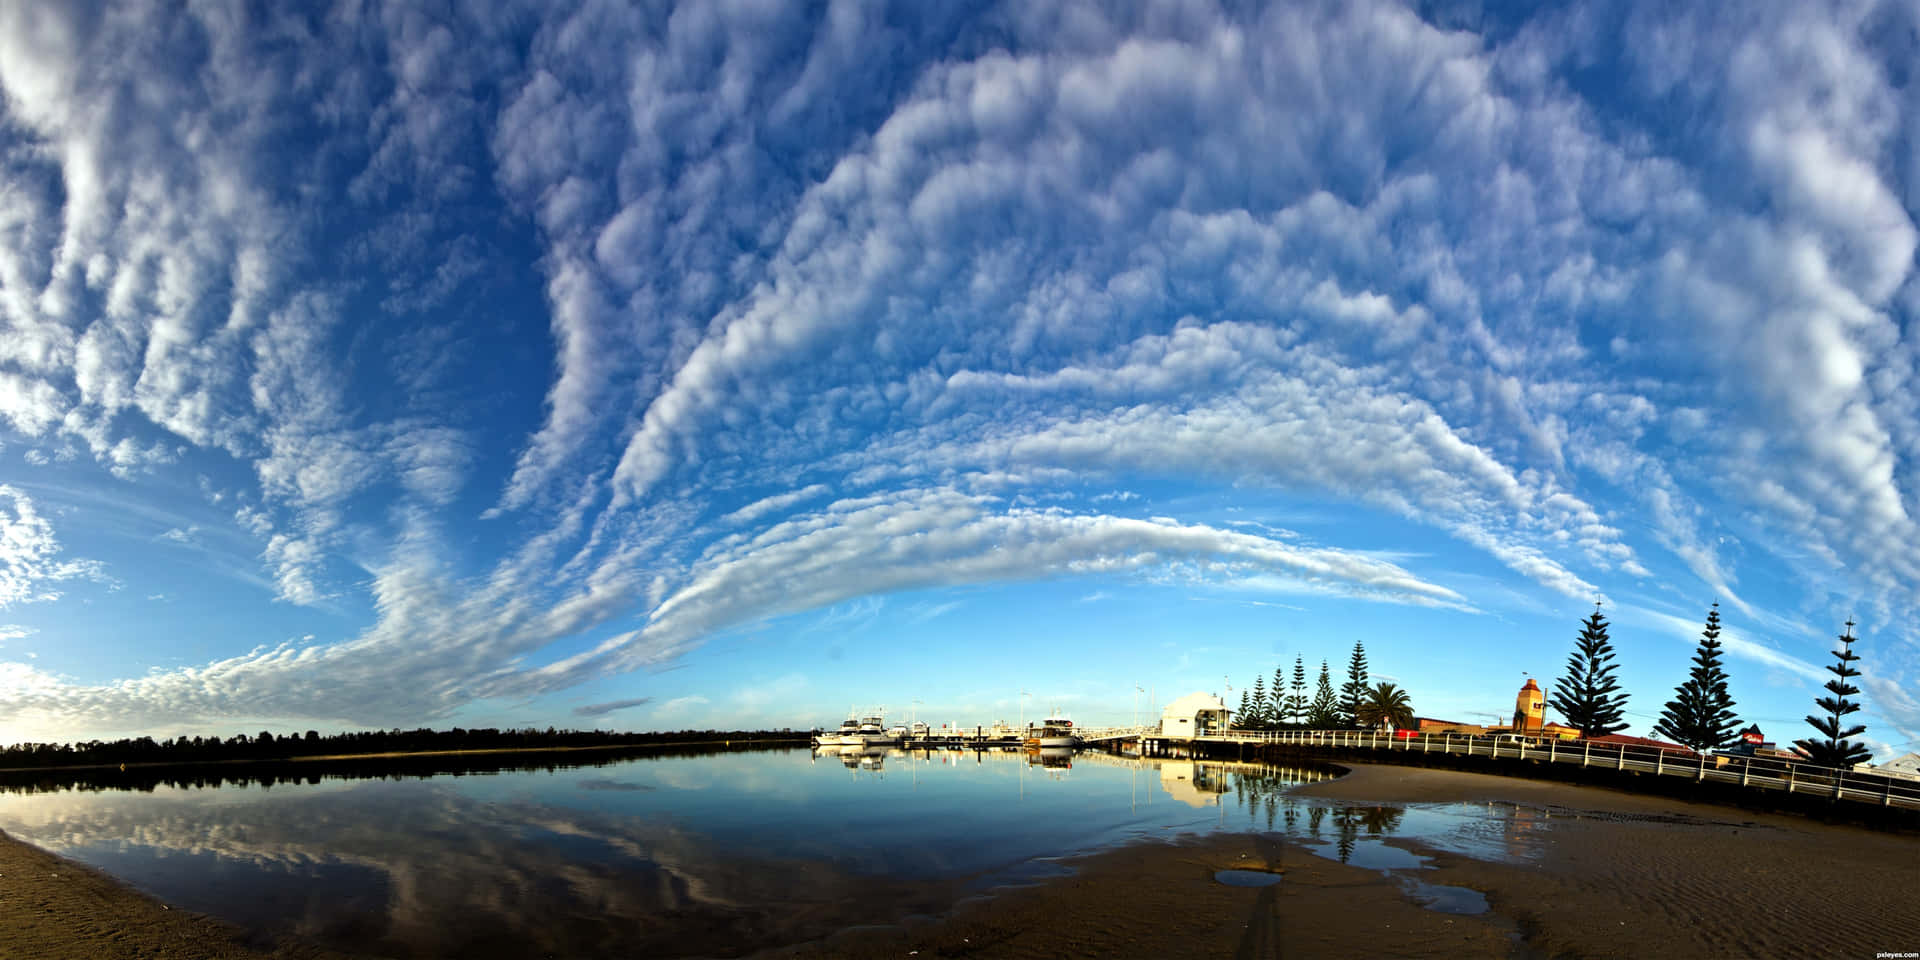 Cloudy Lake Scenery 360 Degree Picture